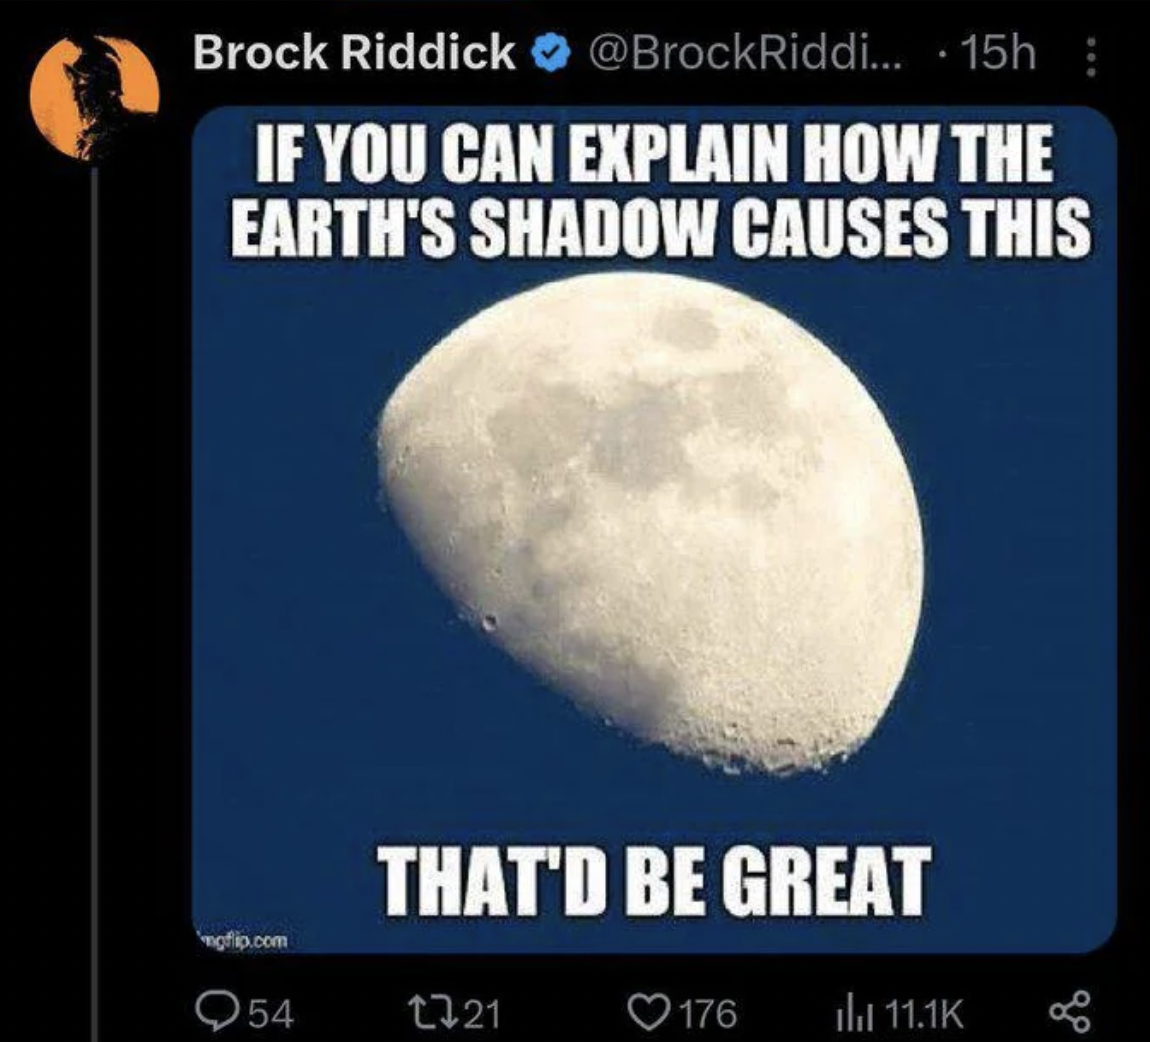 homevestors - Brock Riddick ... 15h If You Can Explain How The Earth'S Shadow Causes This ngfip.com 54 That'D Be Great 21 176